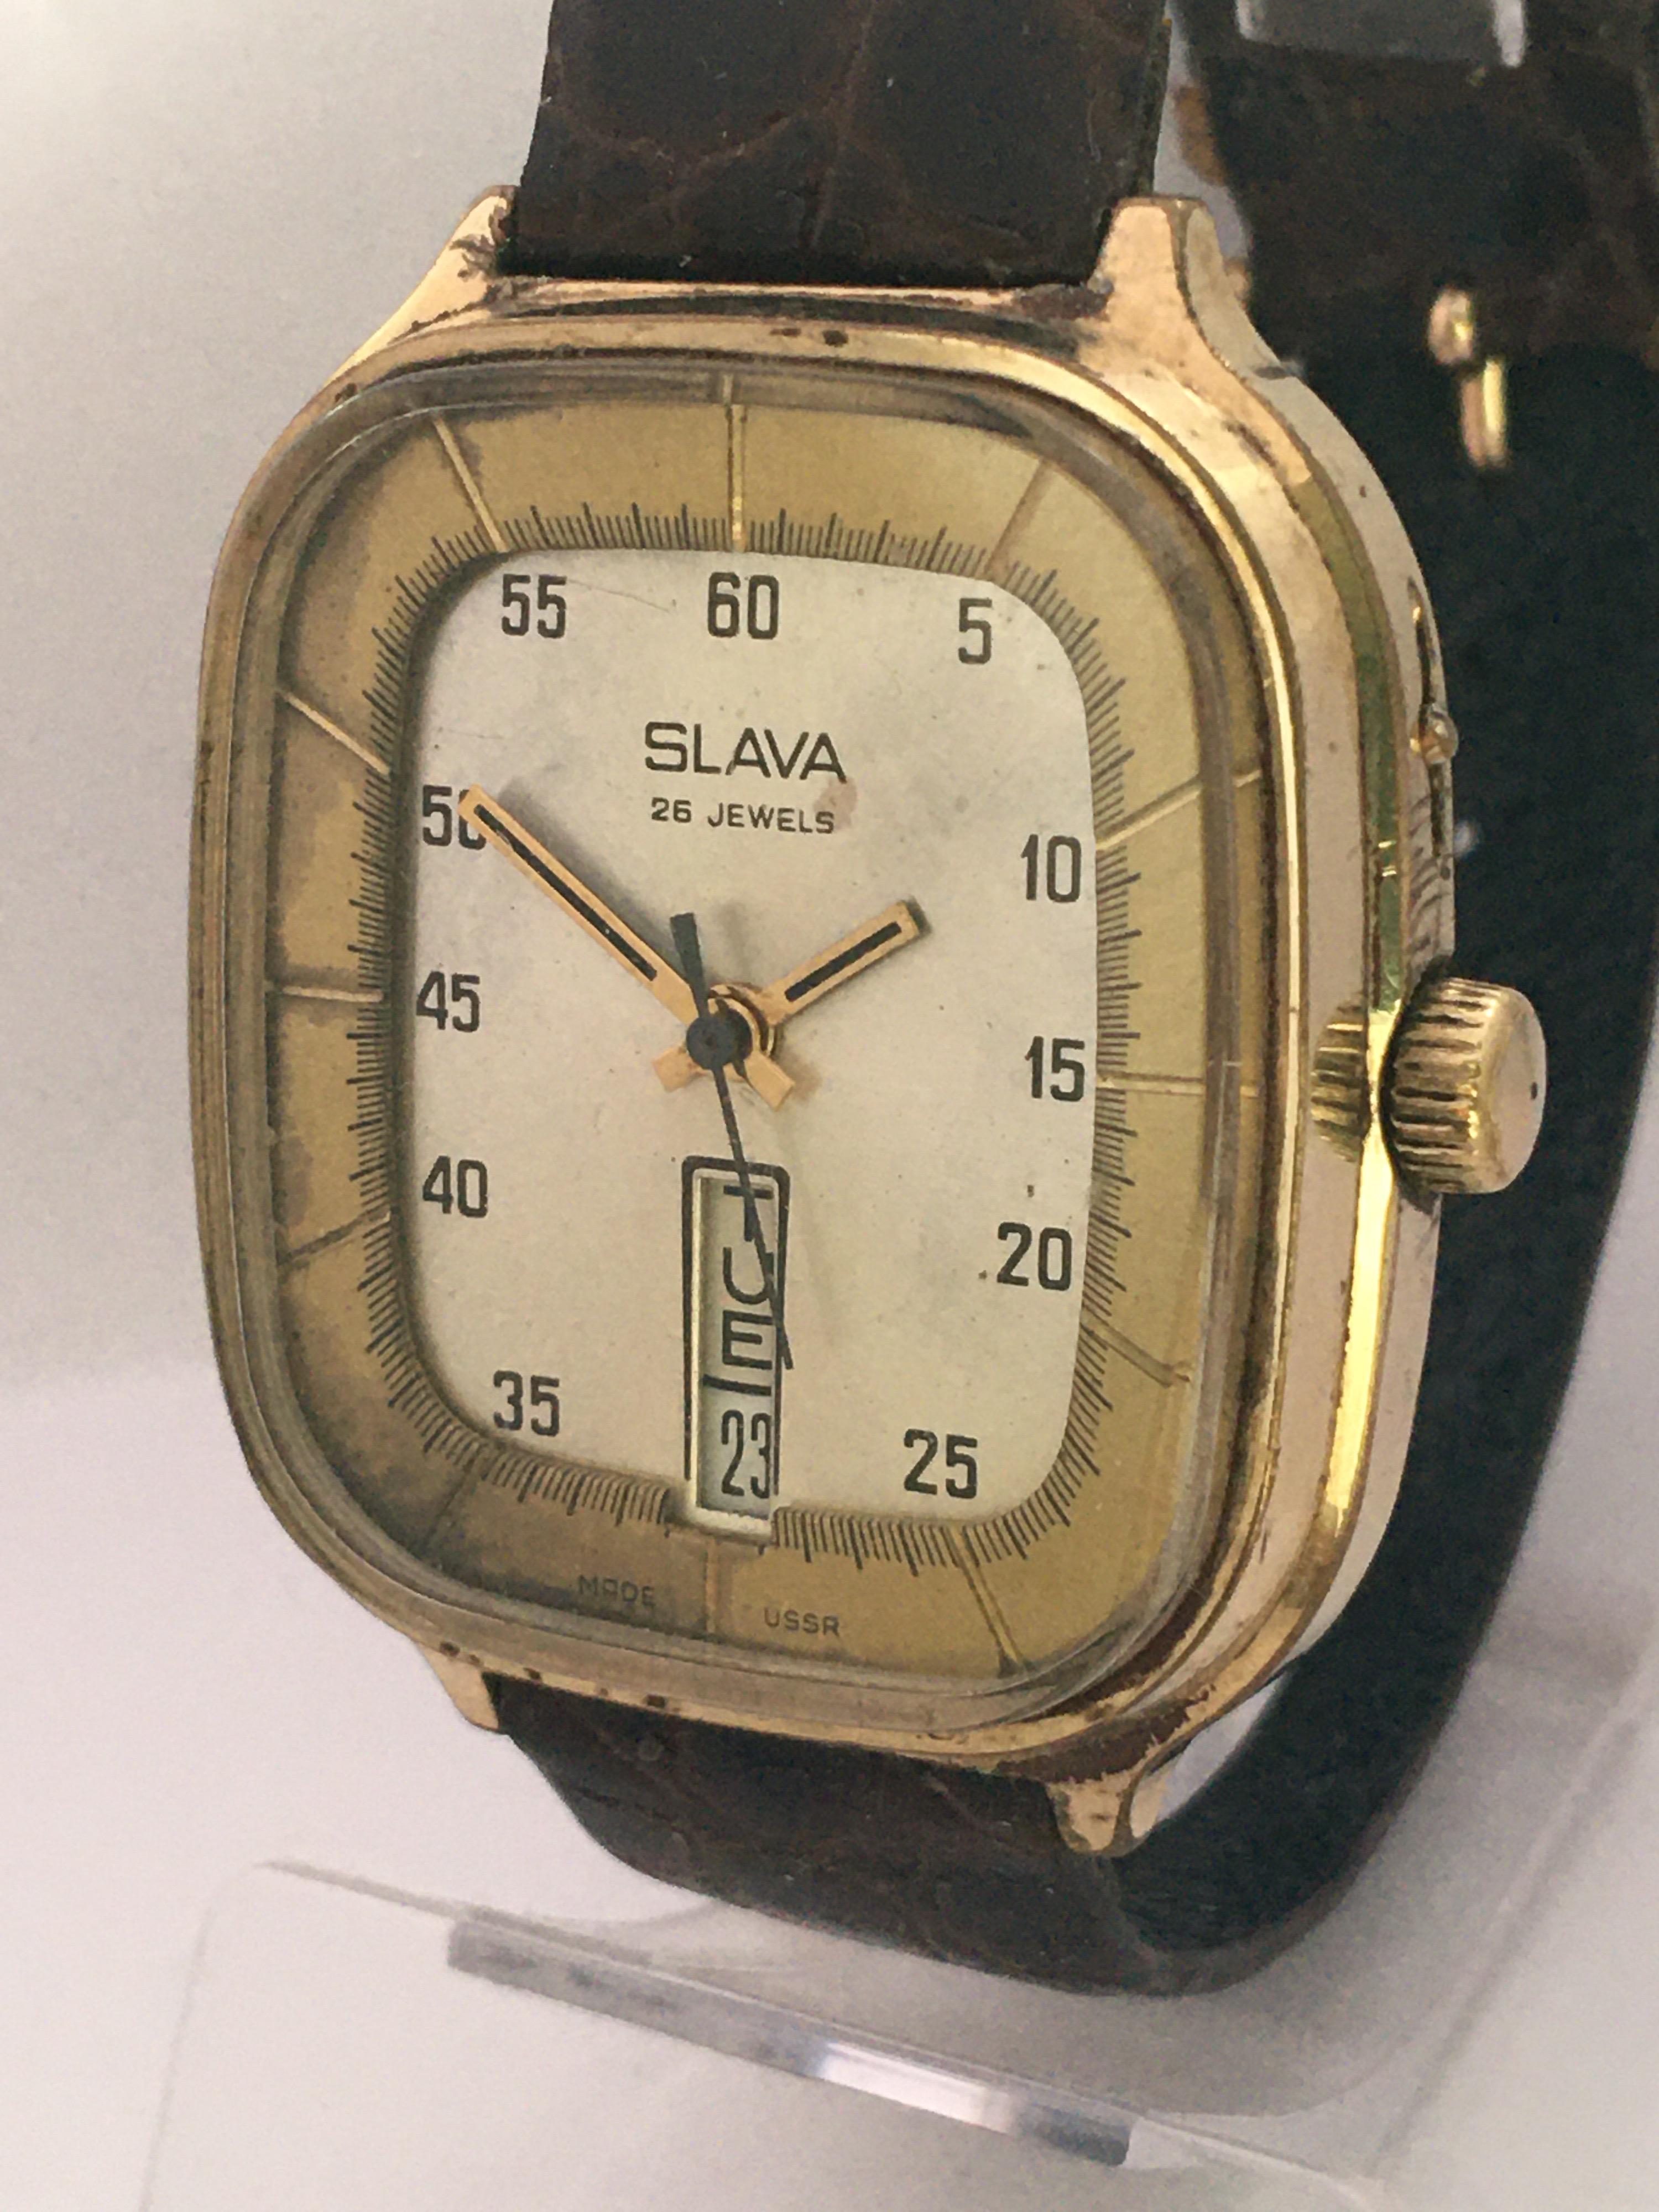 This beautiful vintage hand-winding USSR Watch in in good working condition and running well (it keeps a good time) Visible signs of ageing and wear with light marks on the watch surface. The golden and silvered dial has aged as shown. The watch